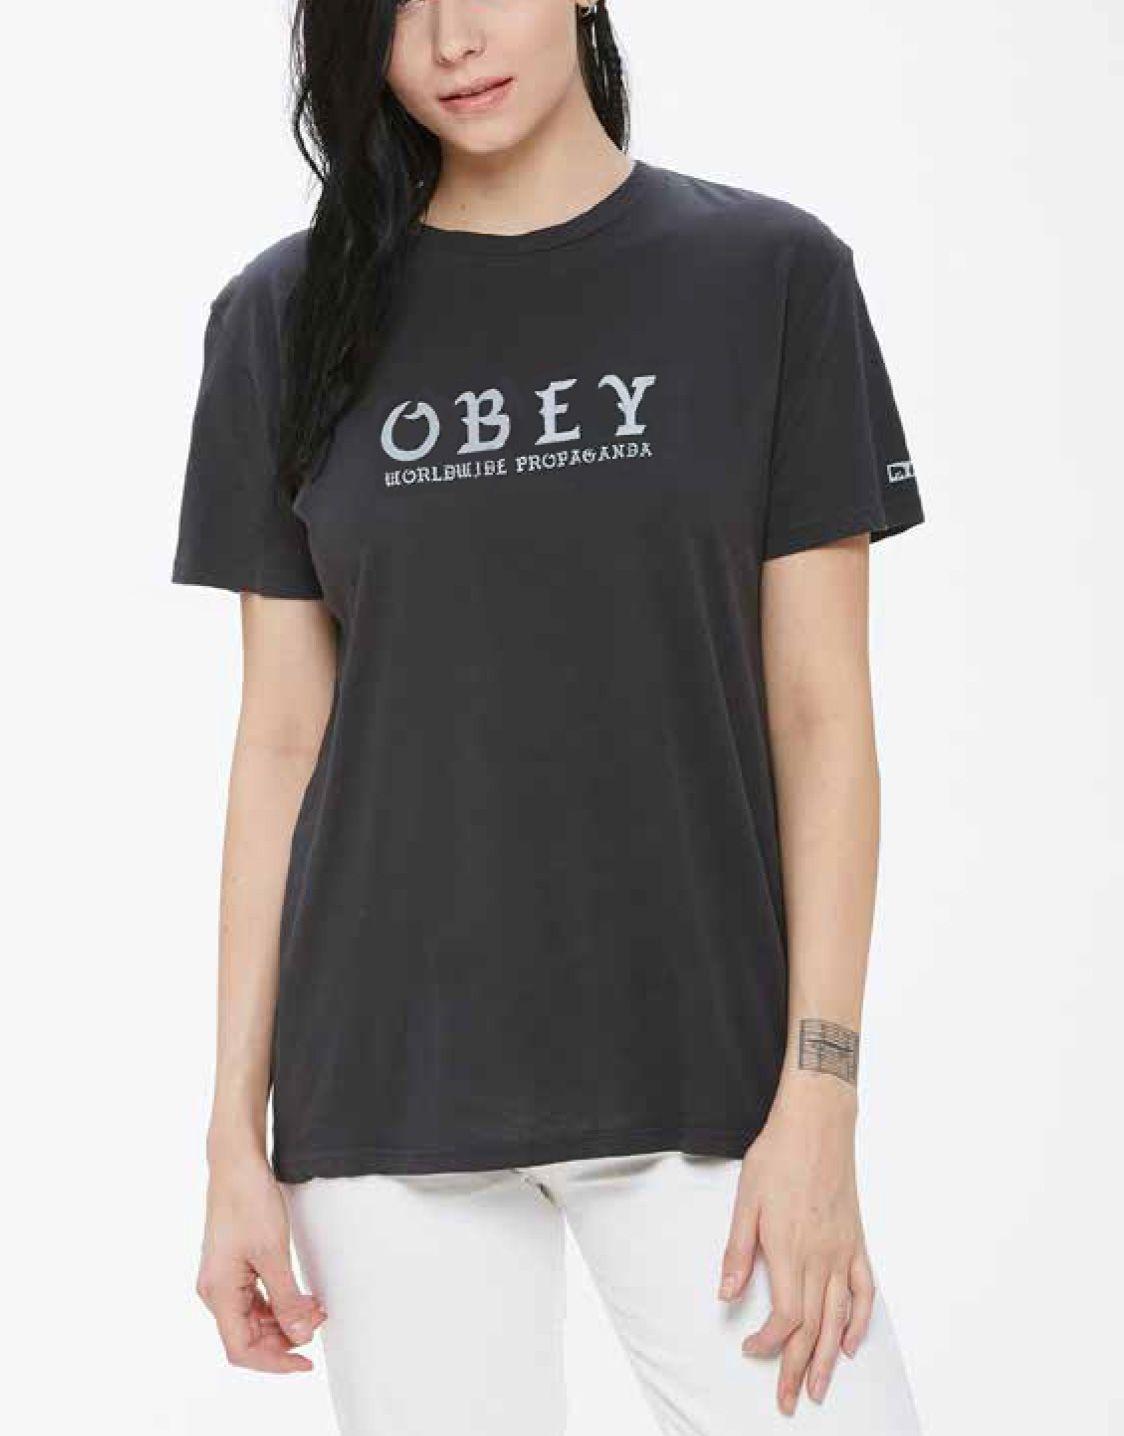 OBEY Clothing Old Logo - OBEY Clothing Old world t-shirt - OnTheBlock